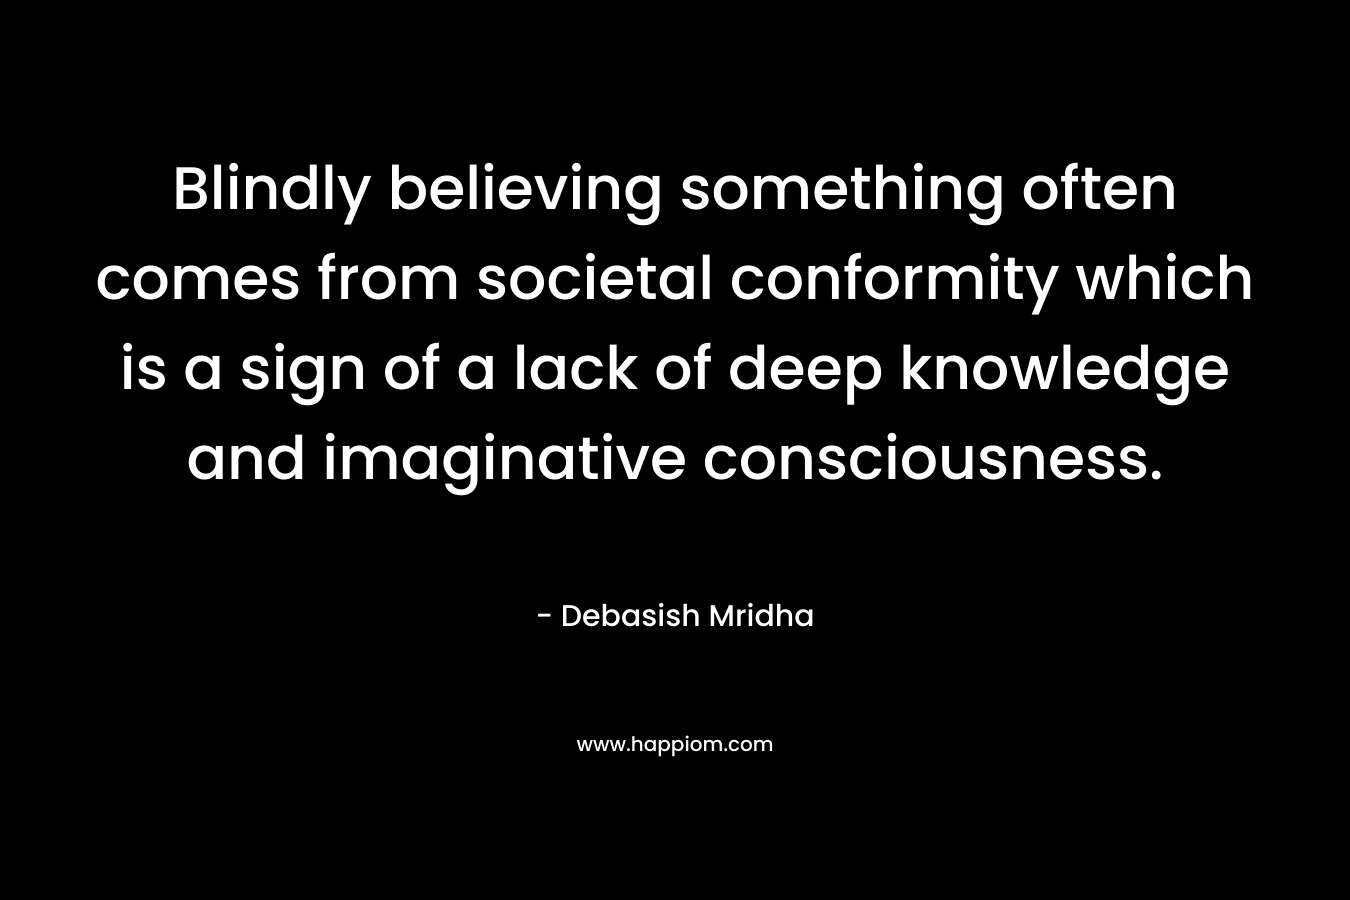 Blindly believing something often comes from societal conformity which is a sign of a lack of deep knowledge and imaginative consciousness.